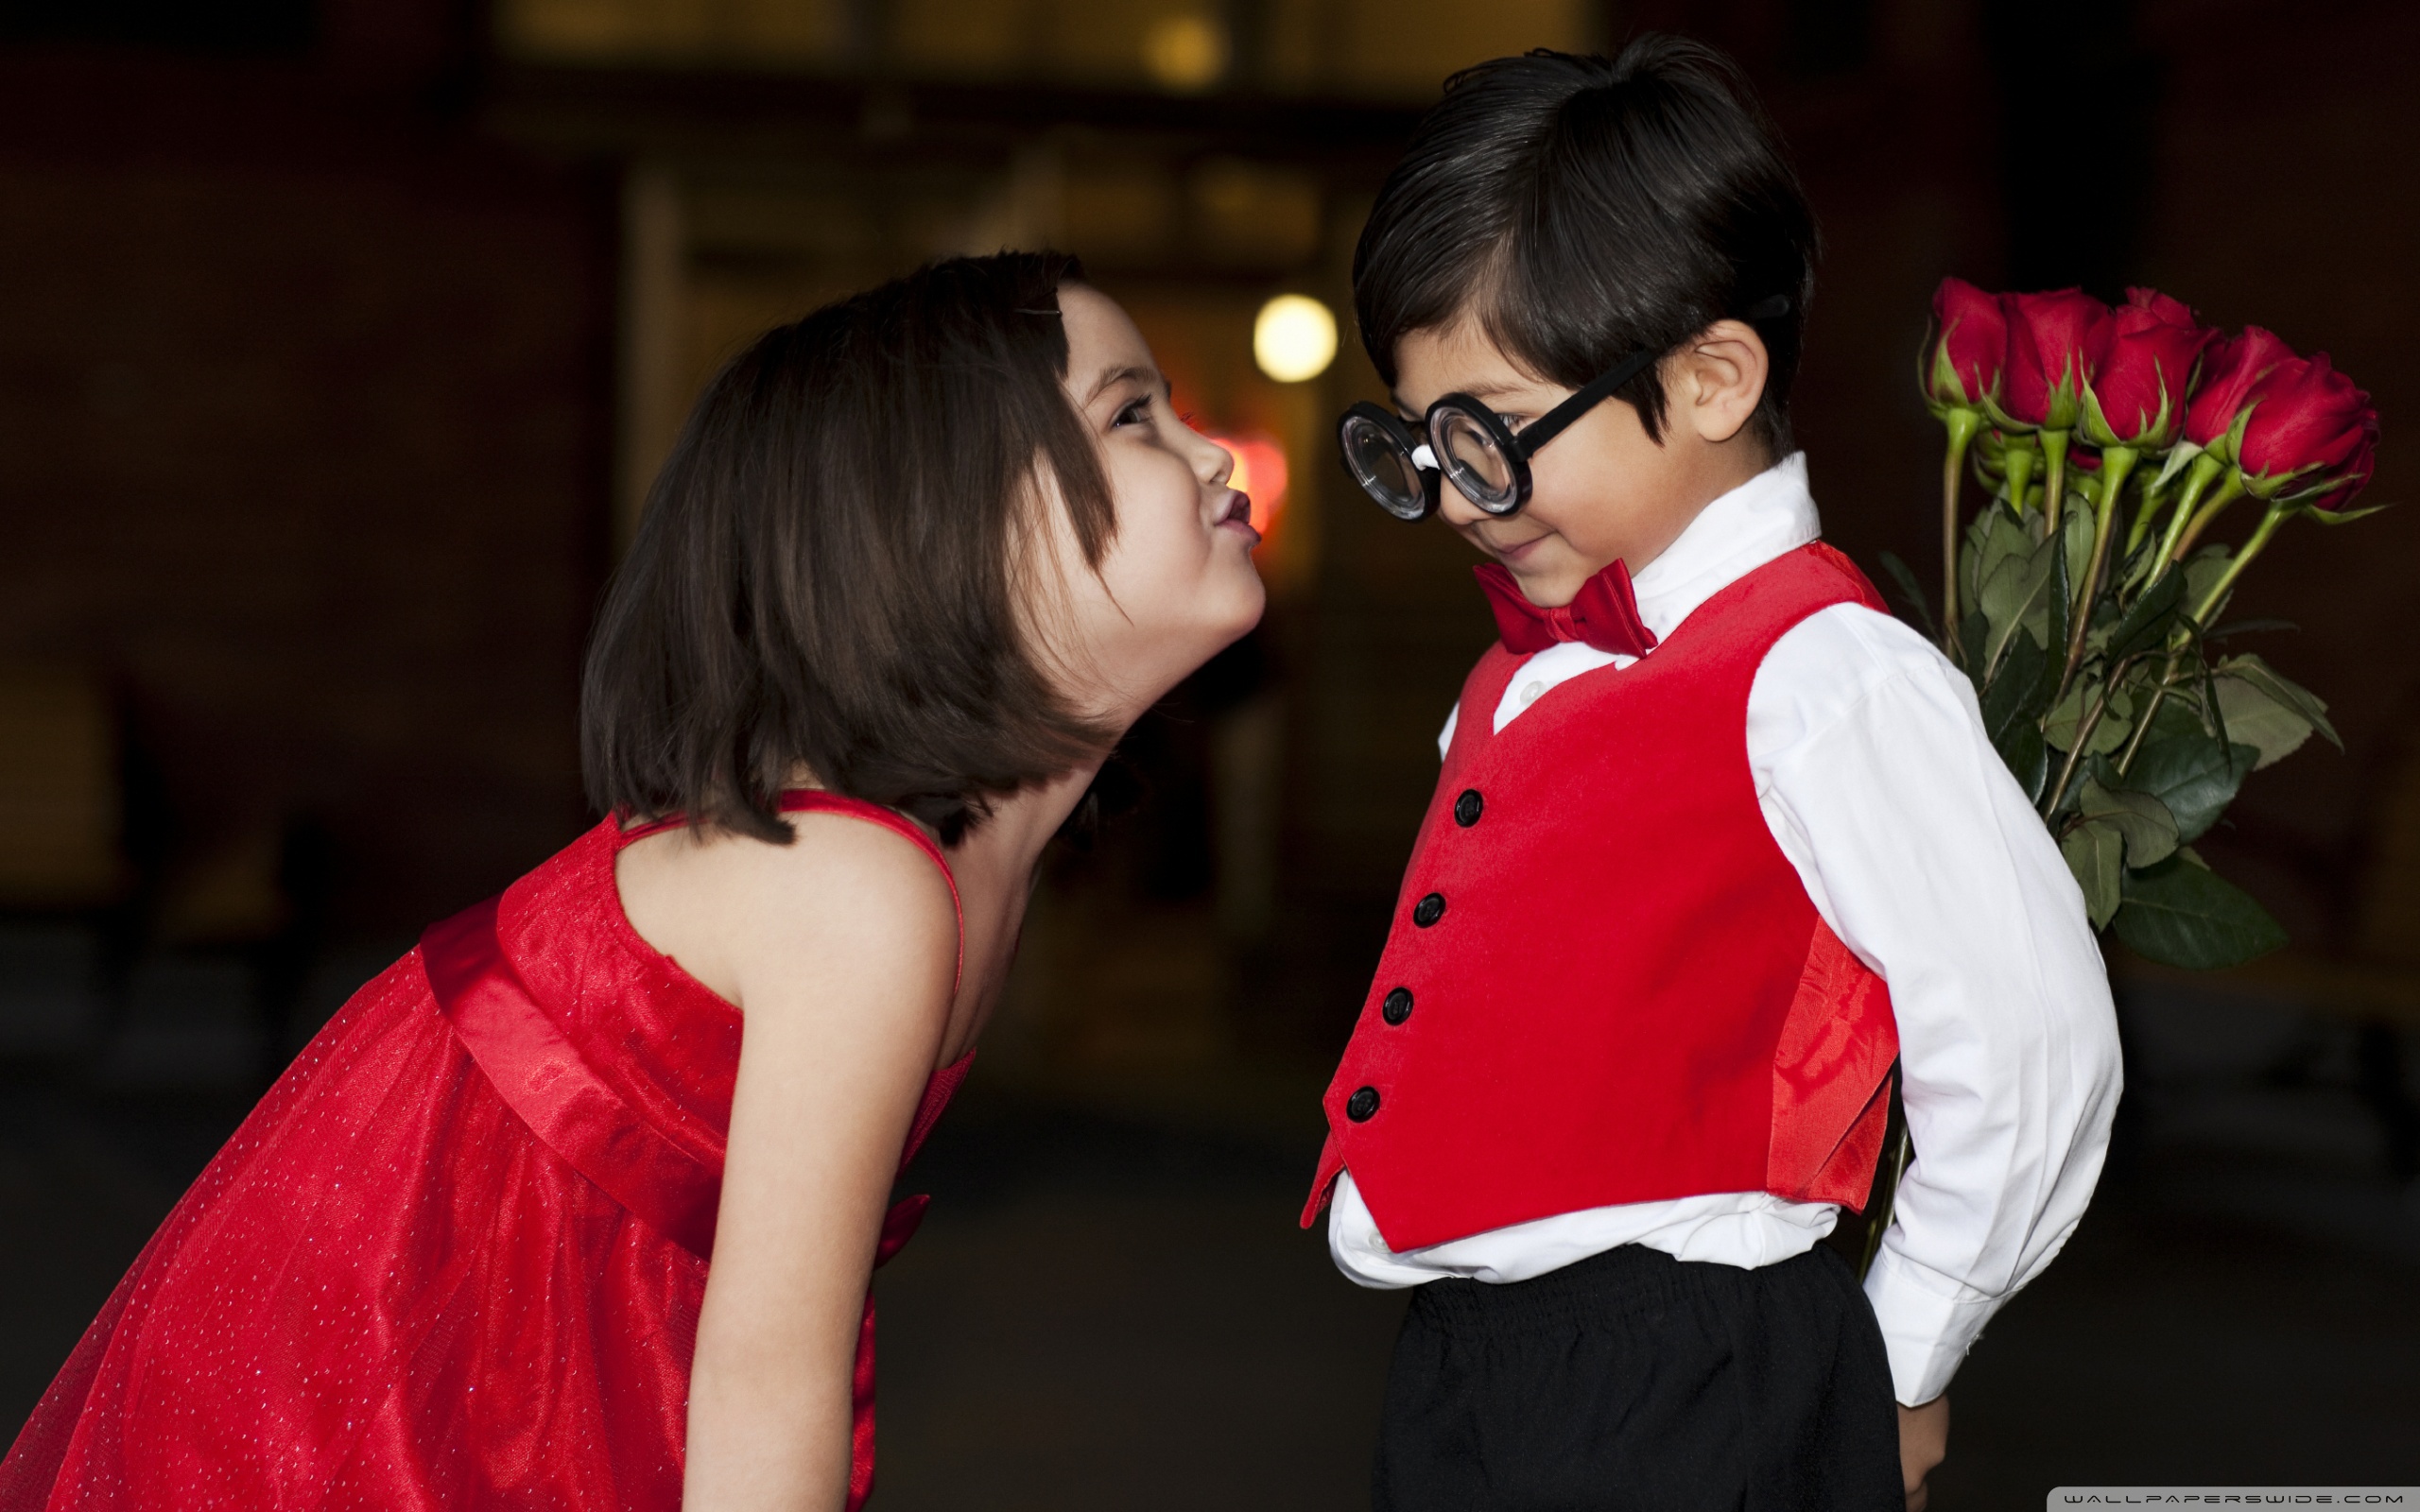 Boys And Girls Love Wallpaper Glasses, Cute Couple, - Hd Photo Love Baby - HD Wallpaper 